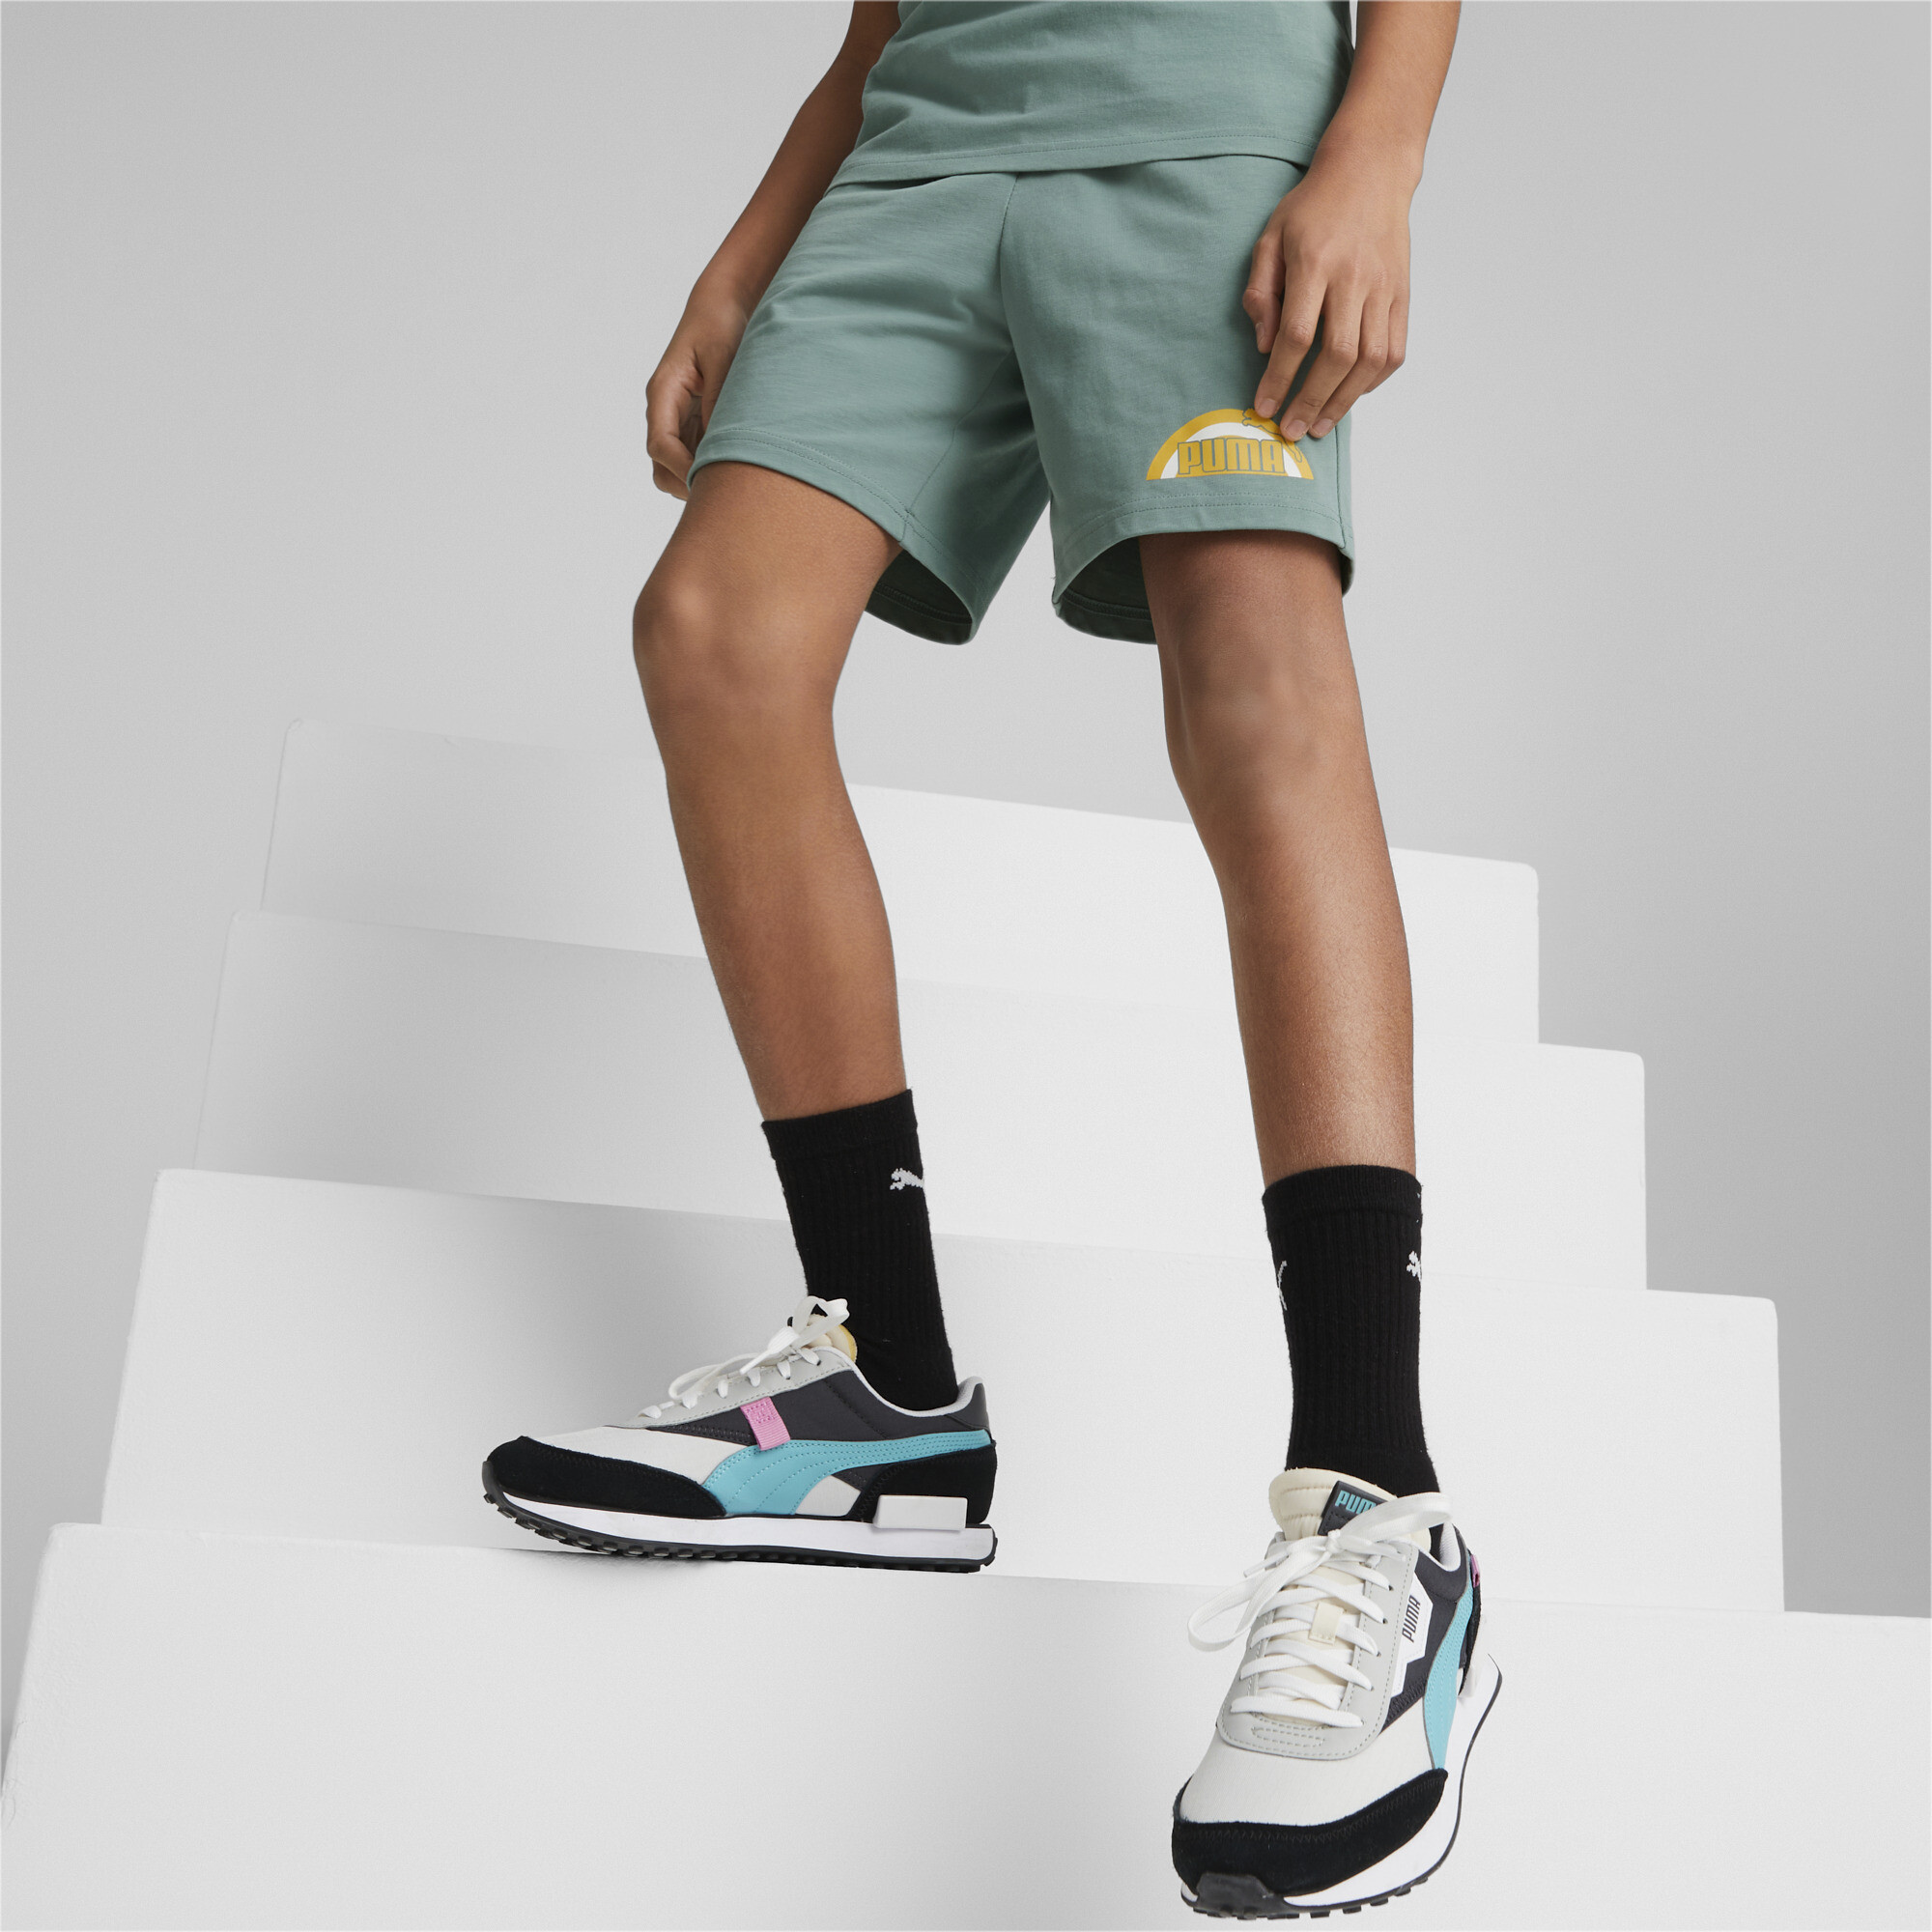 PUMA Essentials+ Street Art Shorts In Gray, Size 15-16 Youth